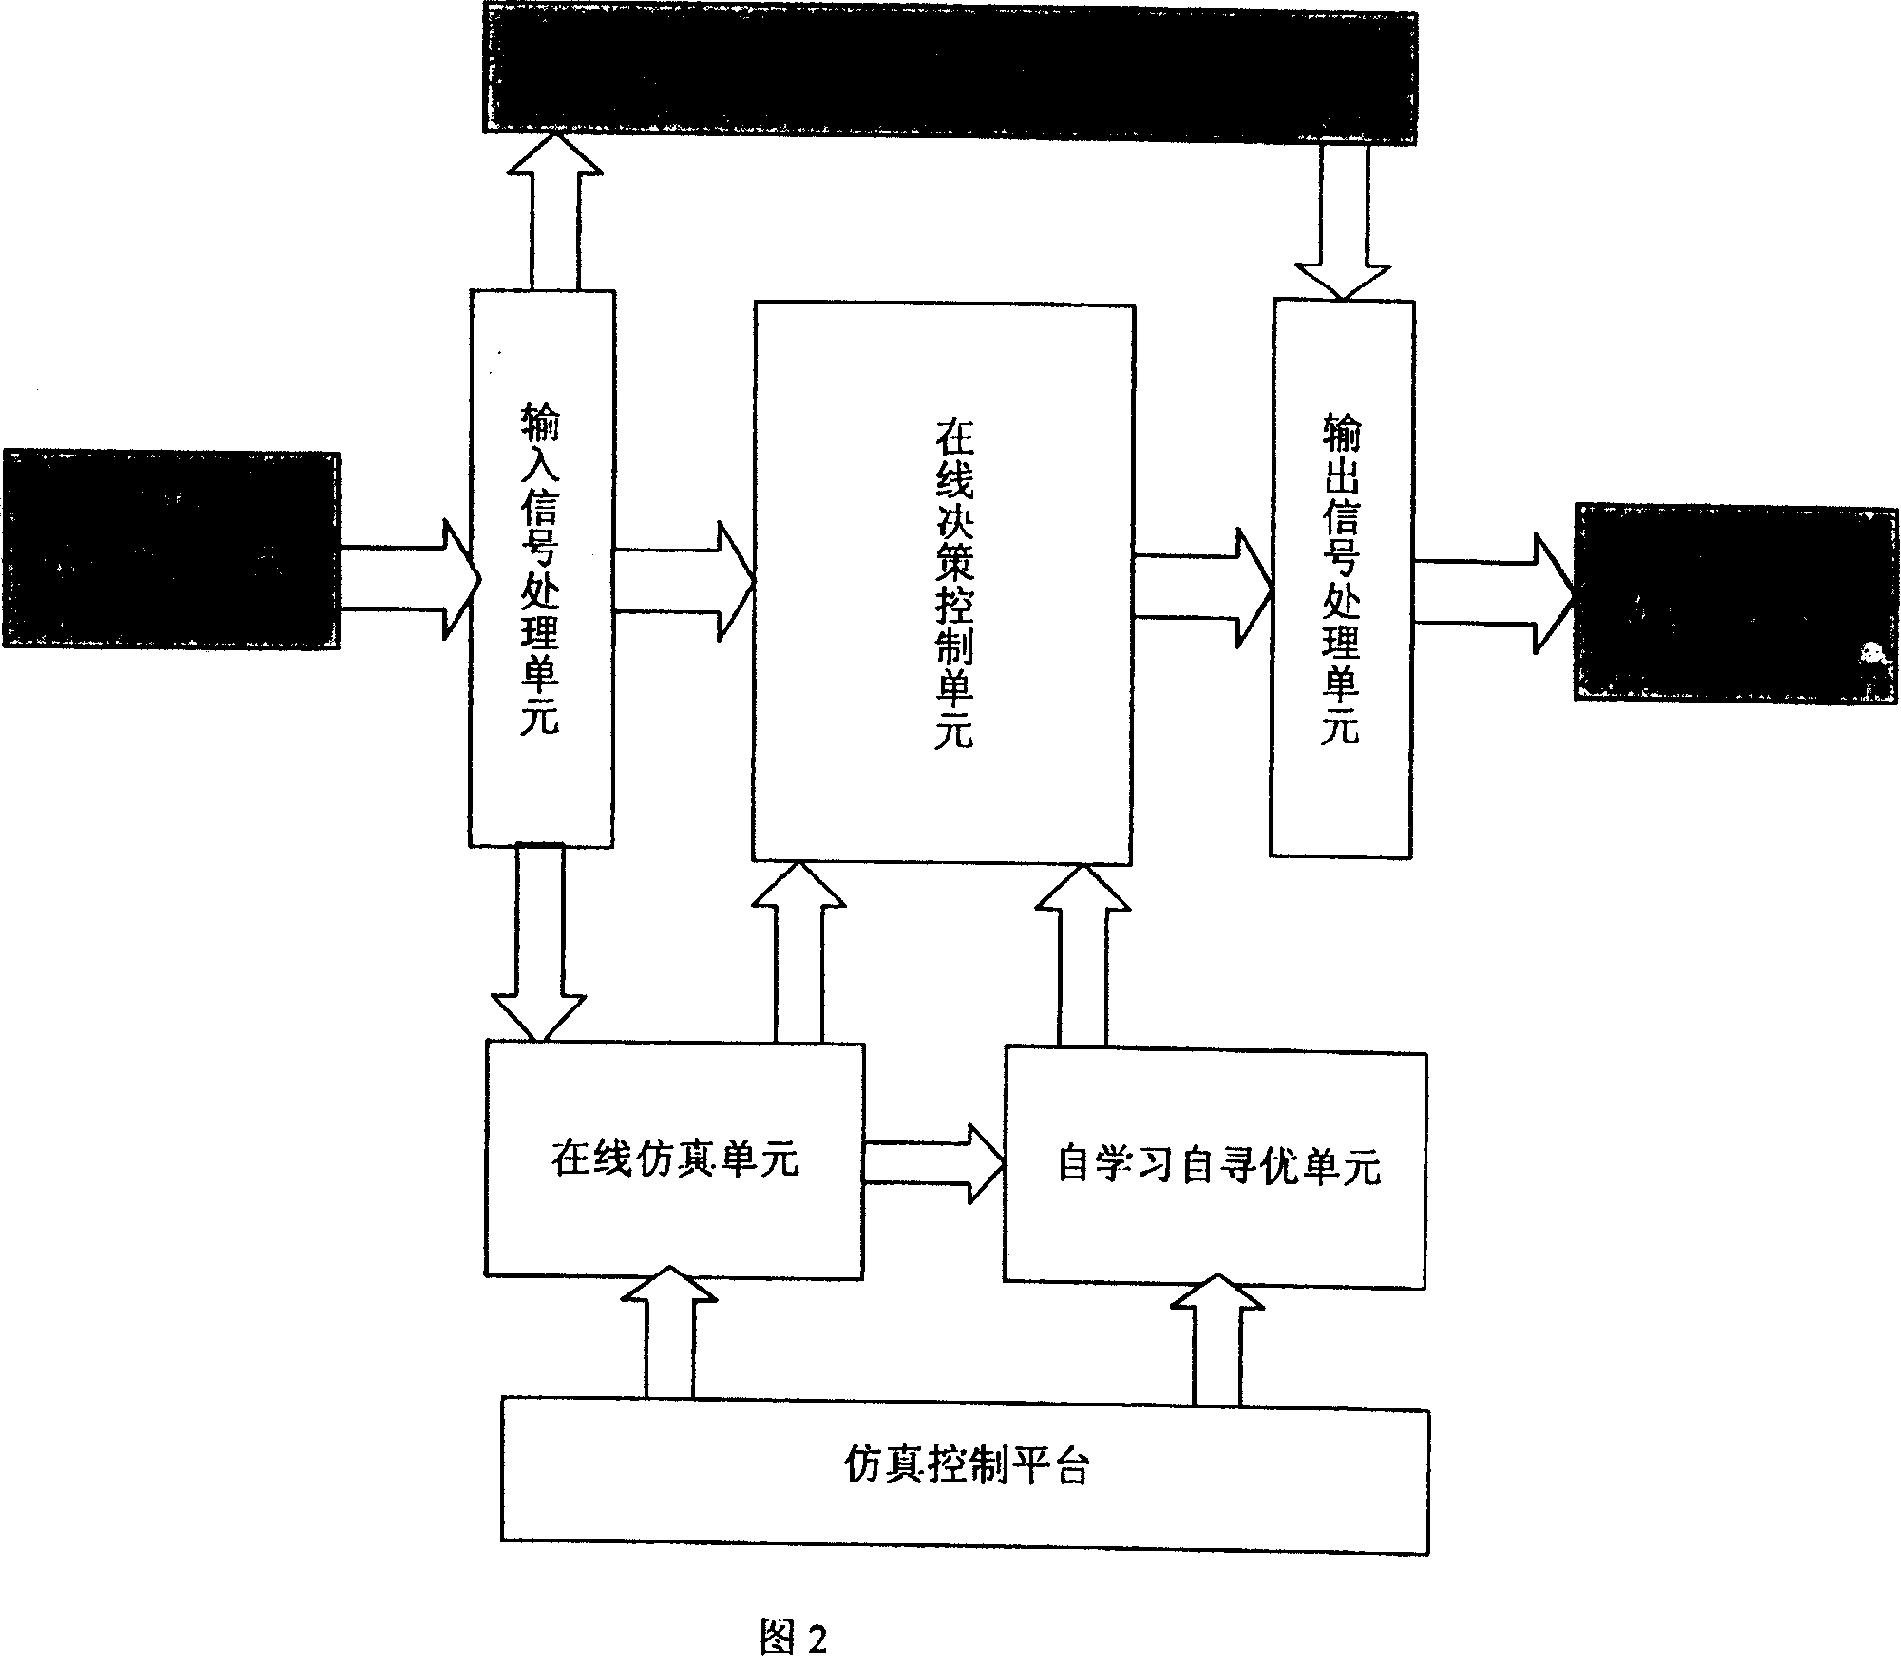 Controlling method and system for digital steel-ball coal grinder